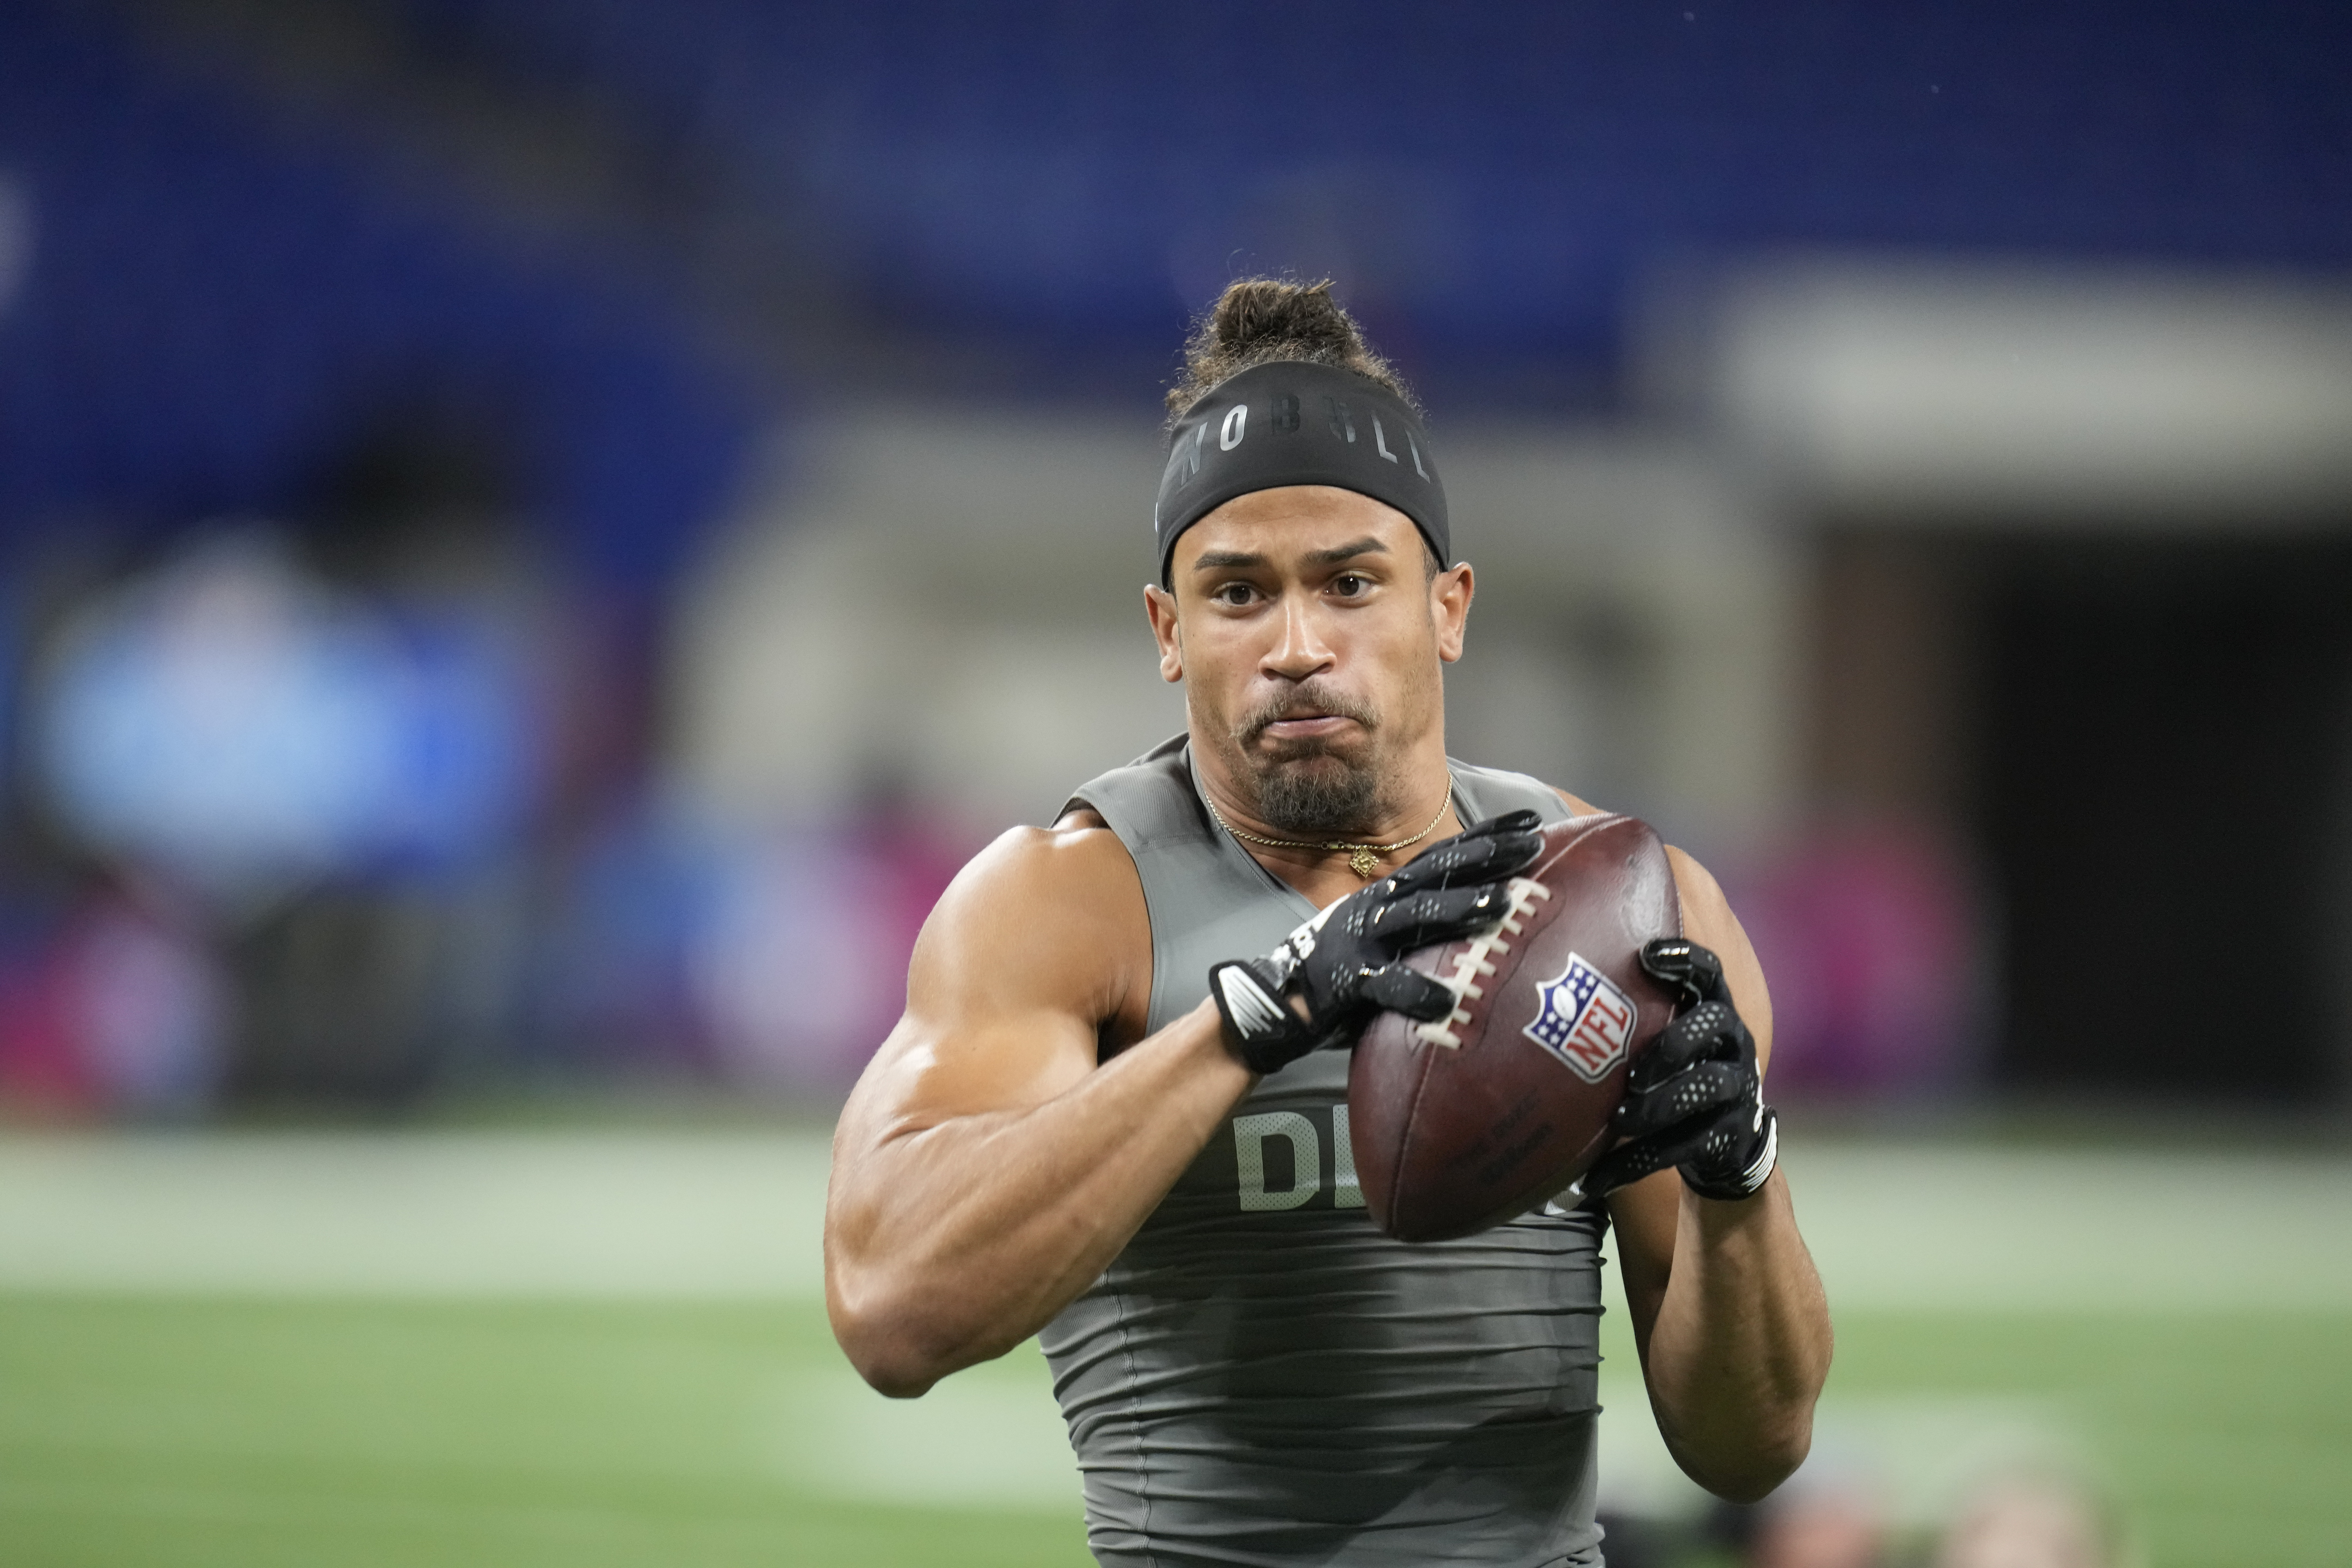 Eagles trade down to No. 12 in NFL draft shuffle; Niners land No. 3 pick